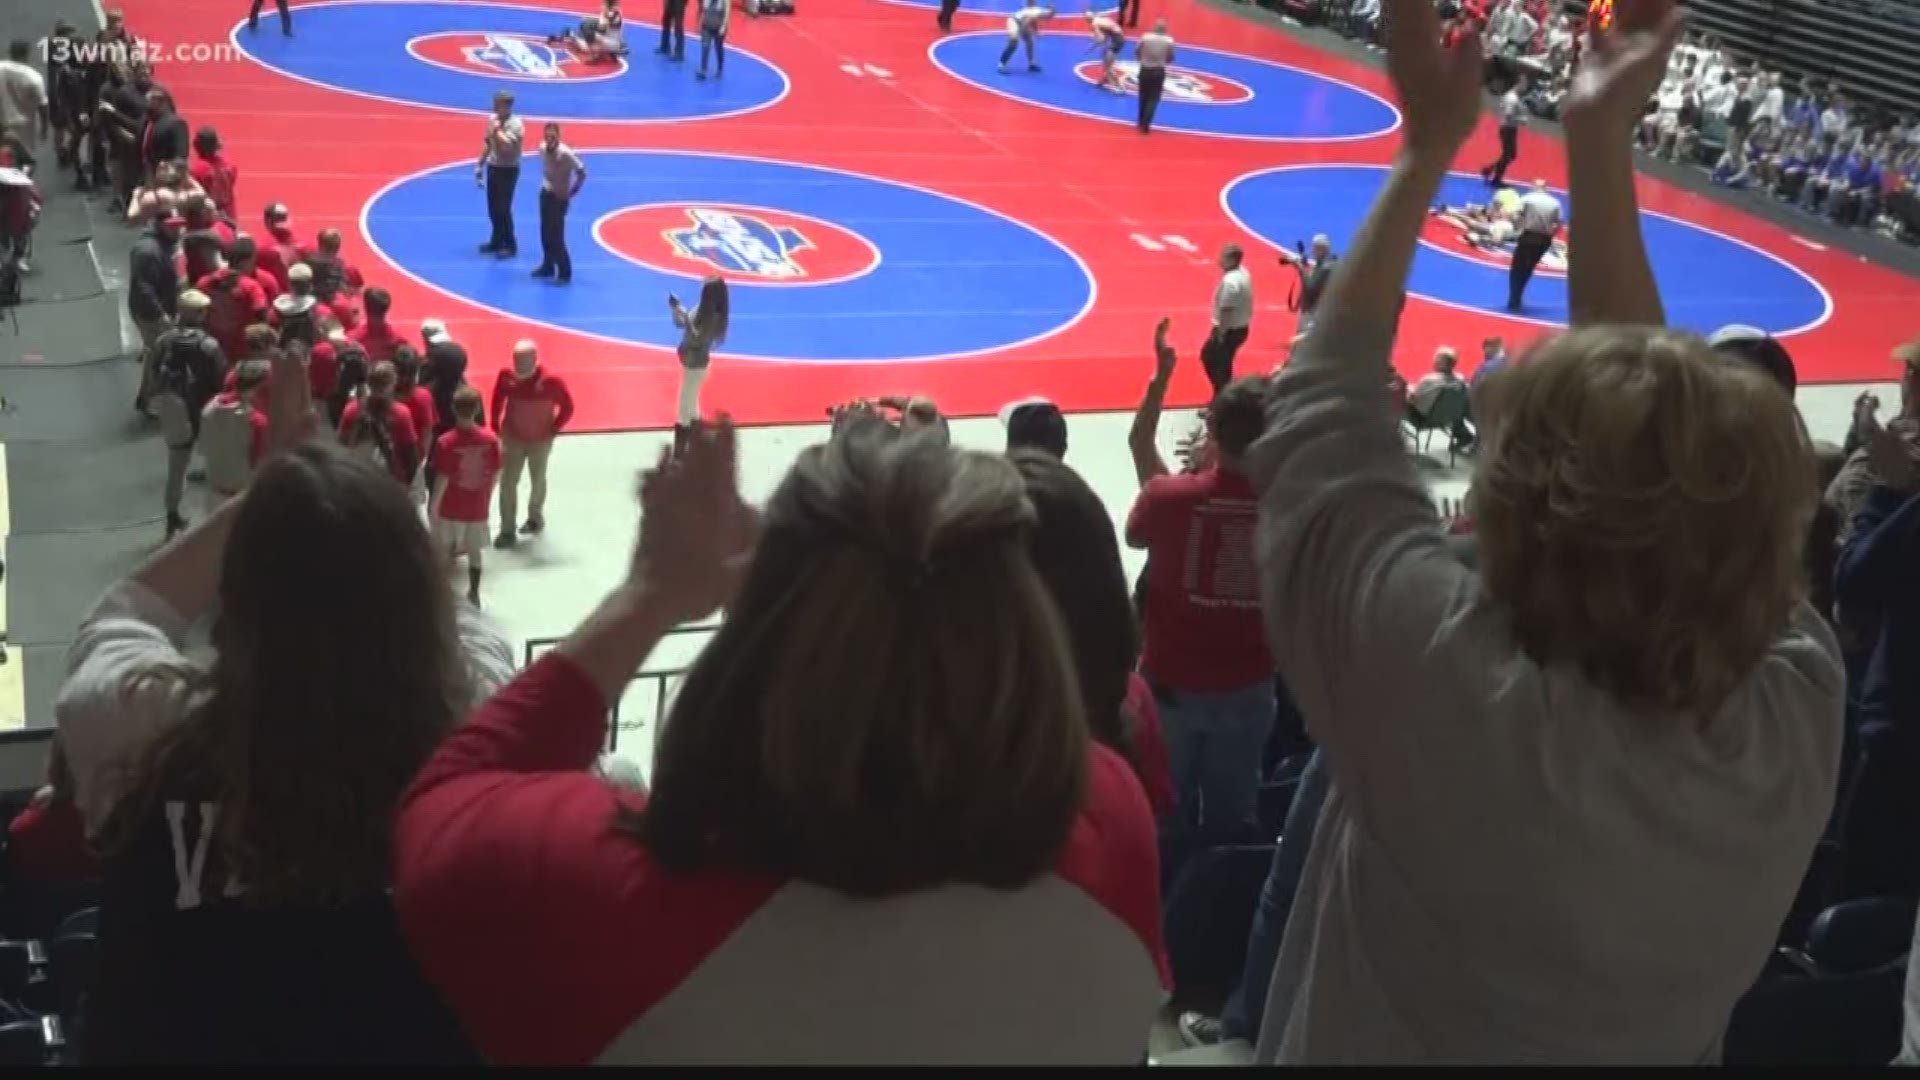 The state championships for boys high school wrestling are in town. Thousands screamed their support for teams inside the Macon Centreplex Saturday.